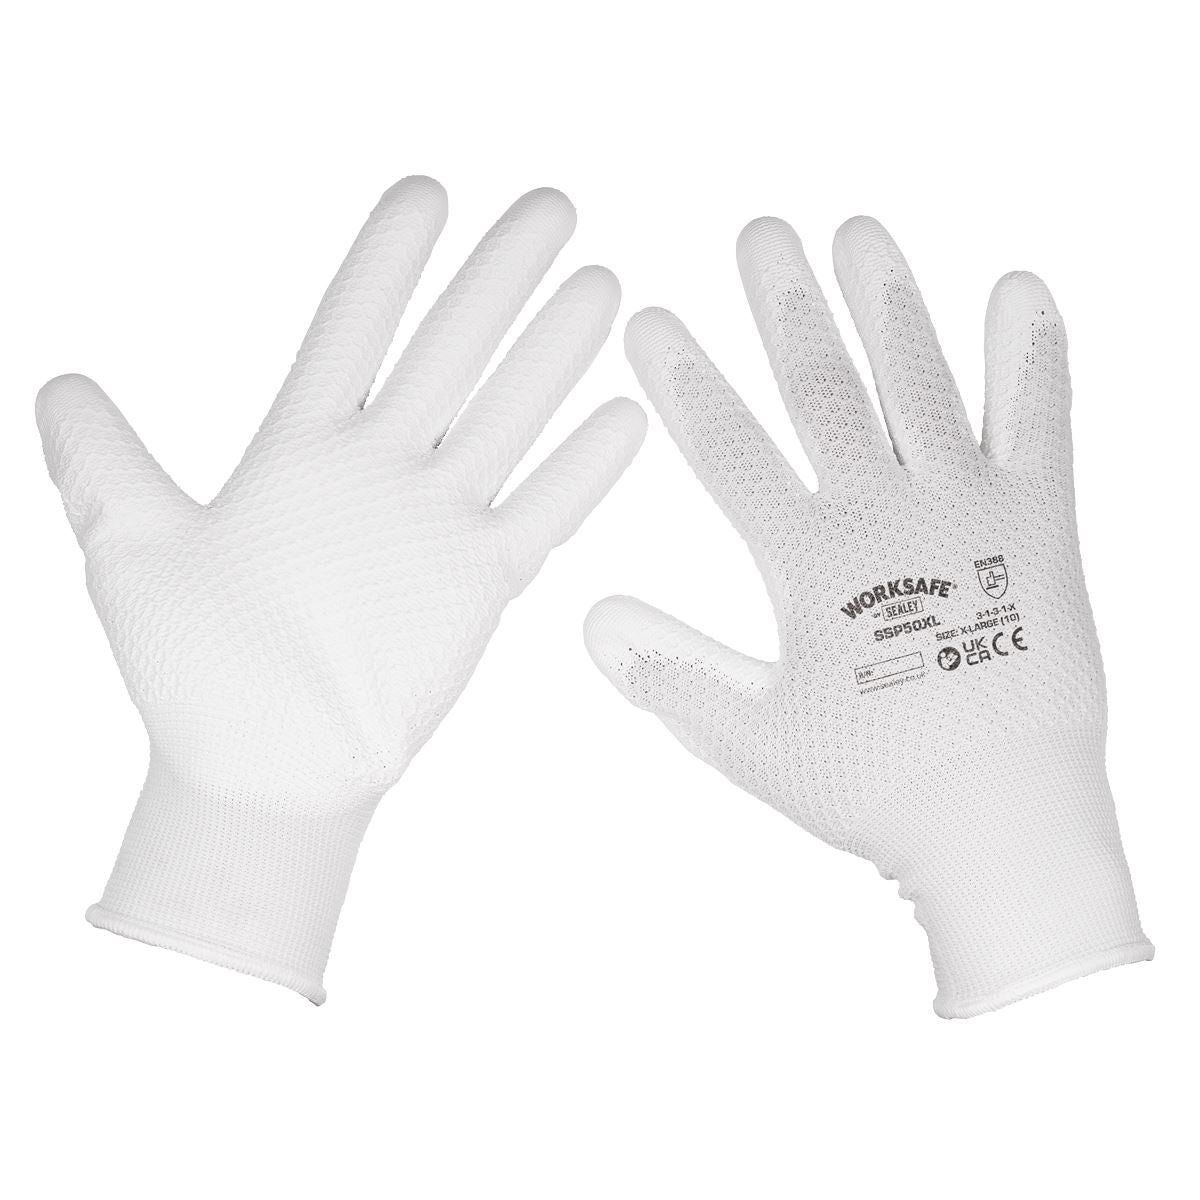 Worksafe by Sealey White Precision Grip gloves - (X-Large) - Pack of 6 Pairs